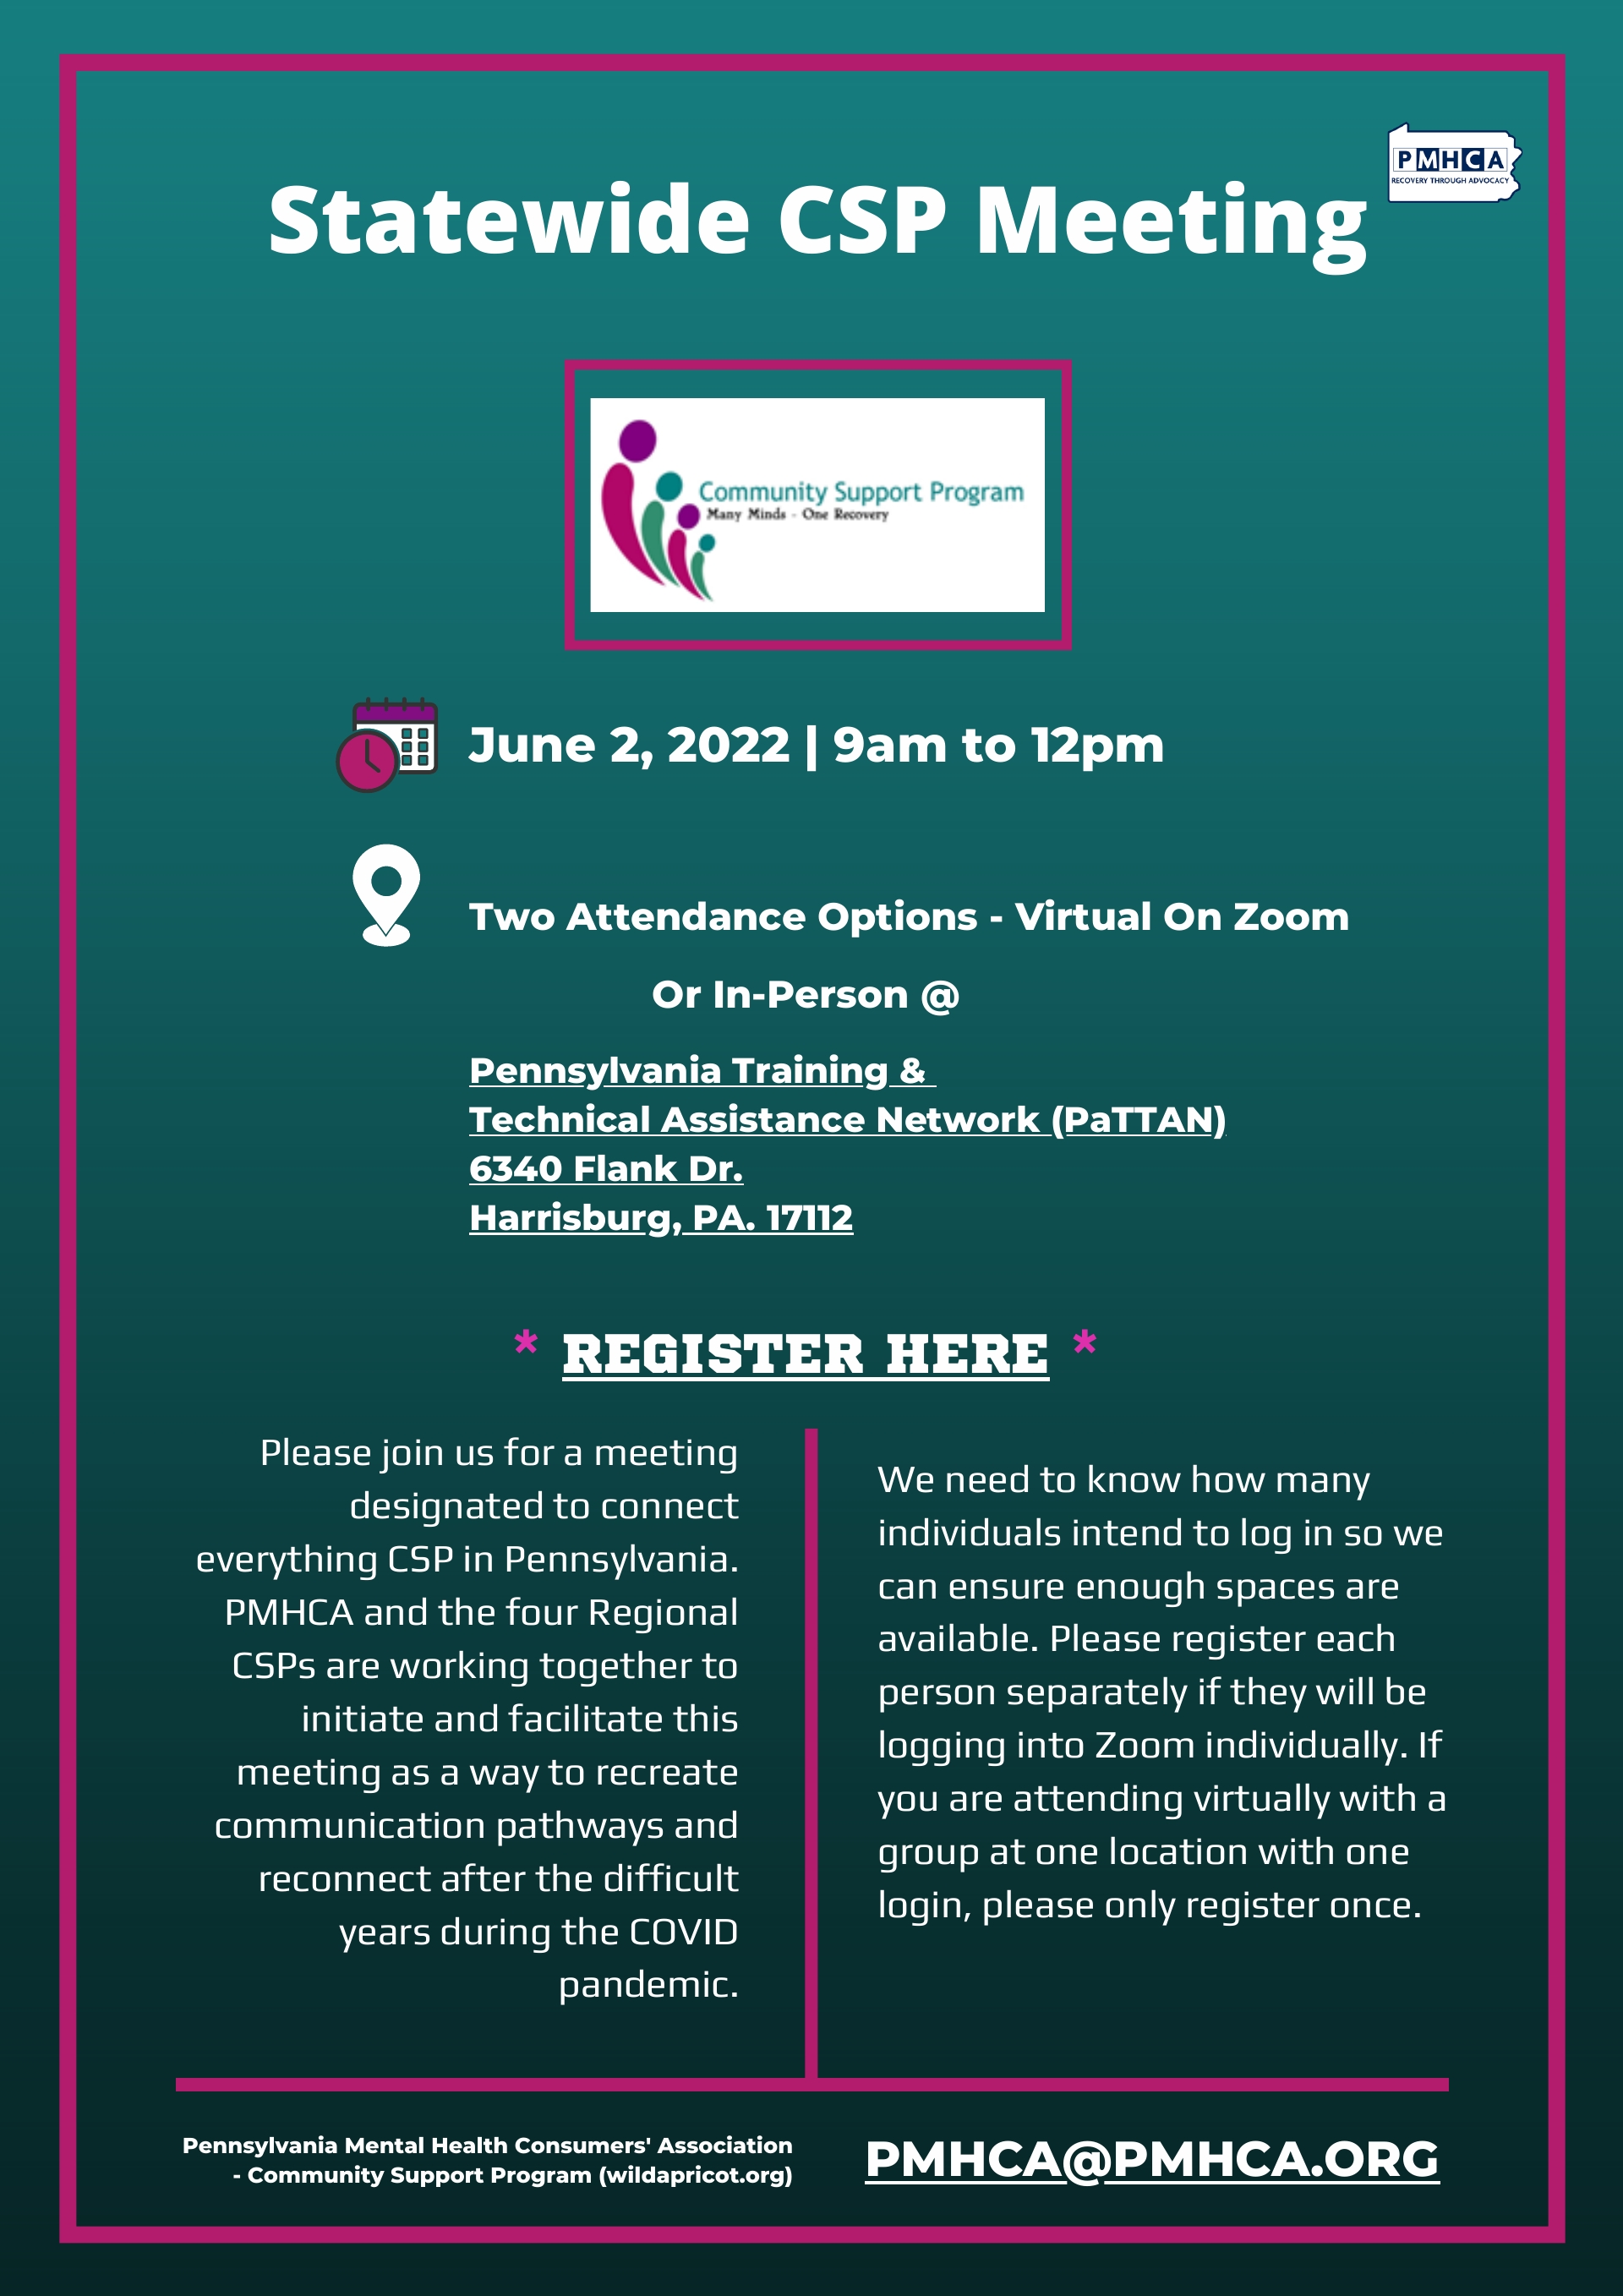 STATEWIDE COMMUNITY SUPPORT PROGRAM MEETING June 2, 2022 In-Person OR Virtual on Zoom!! 9 am to 12 p